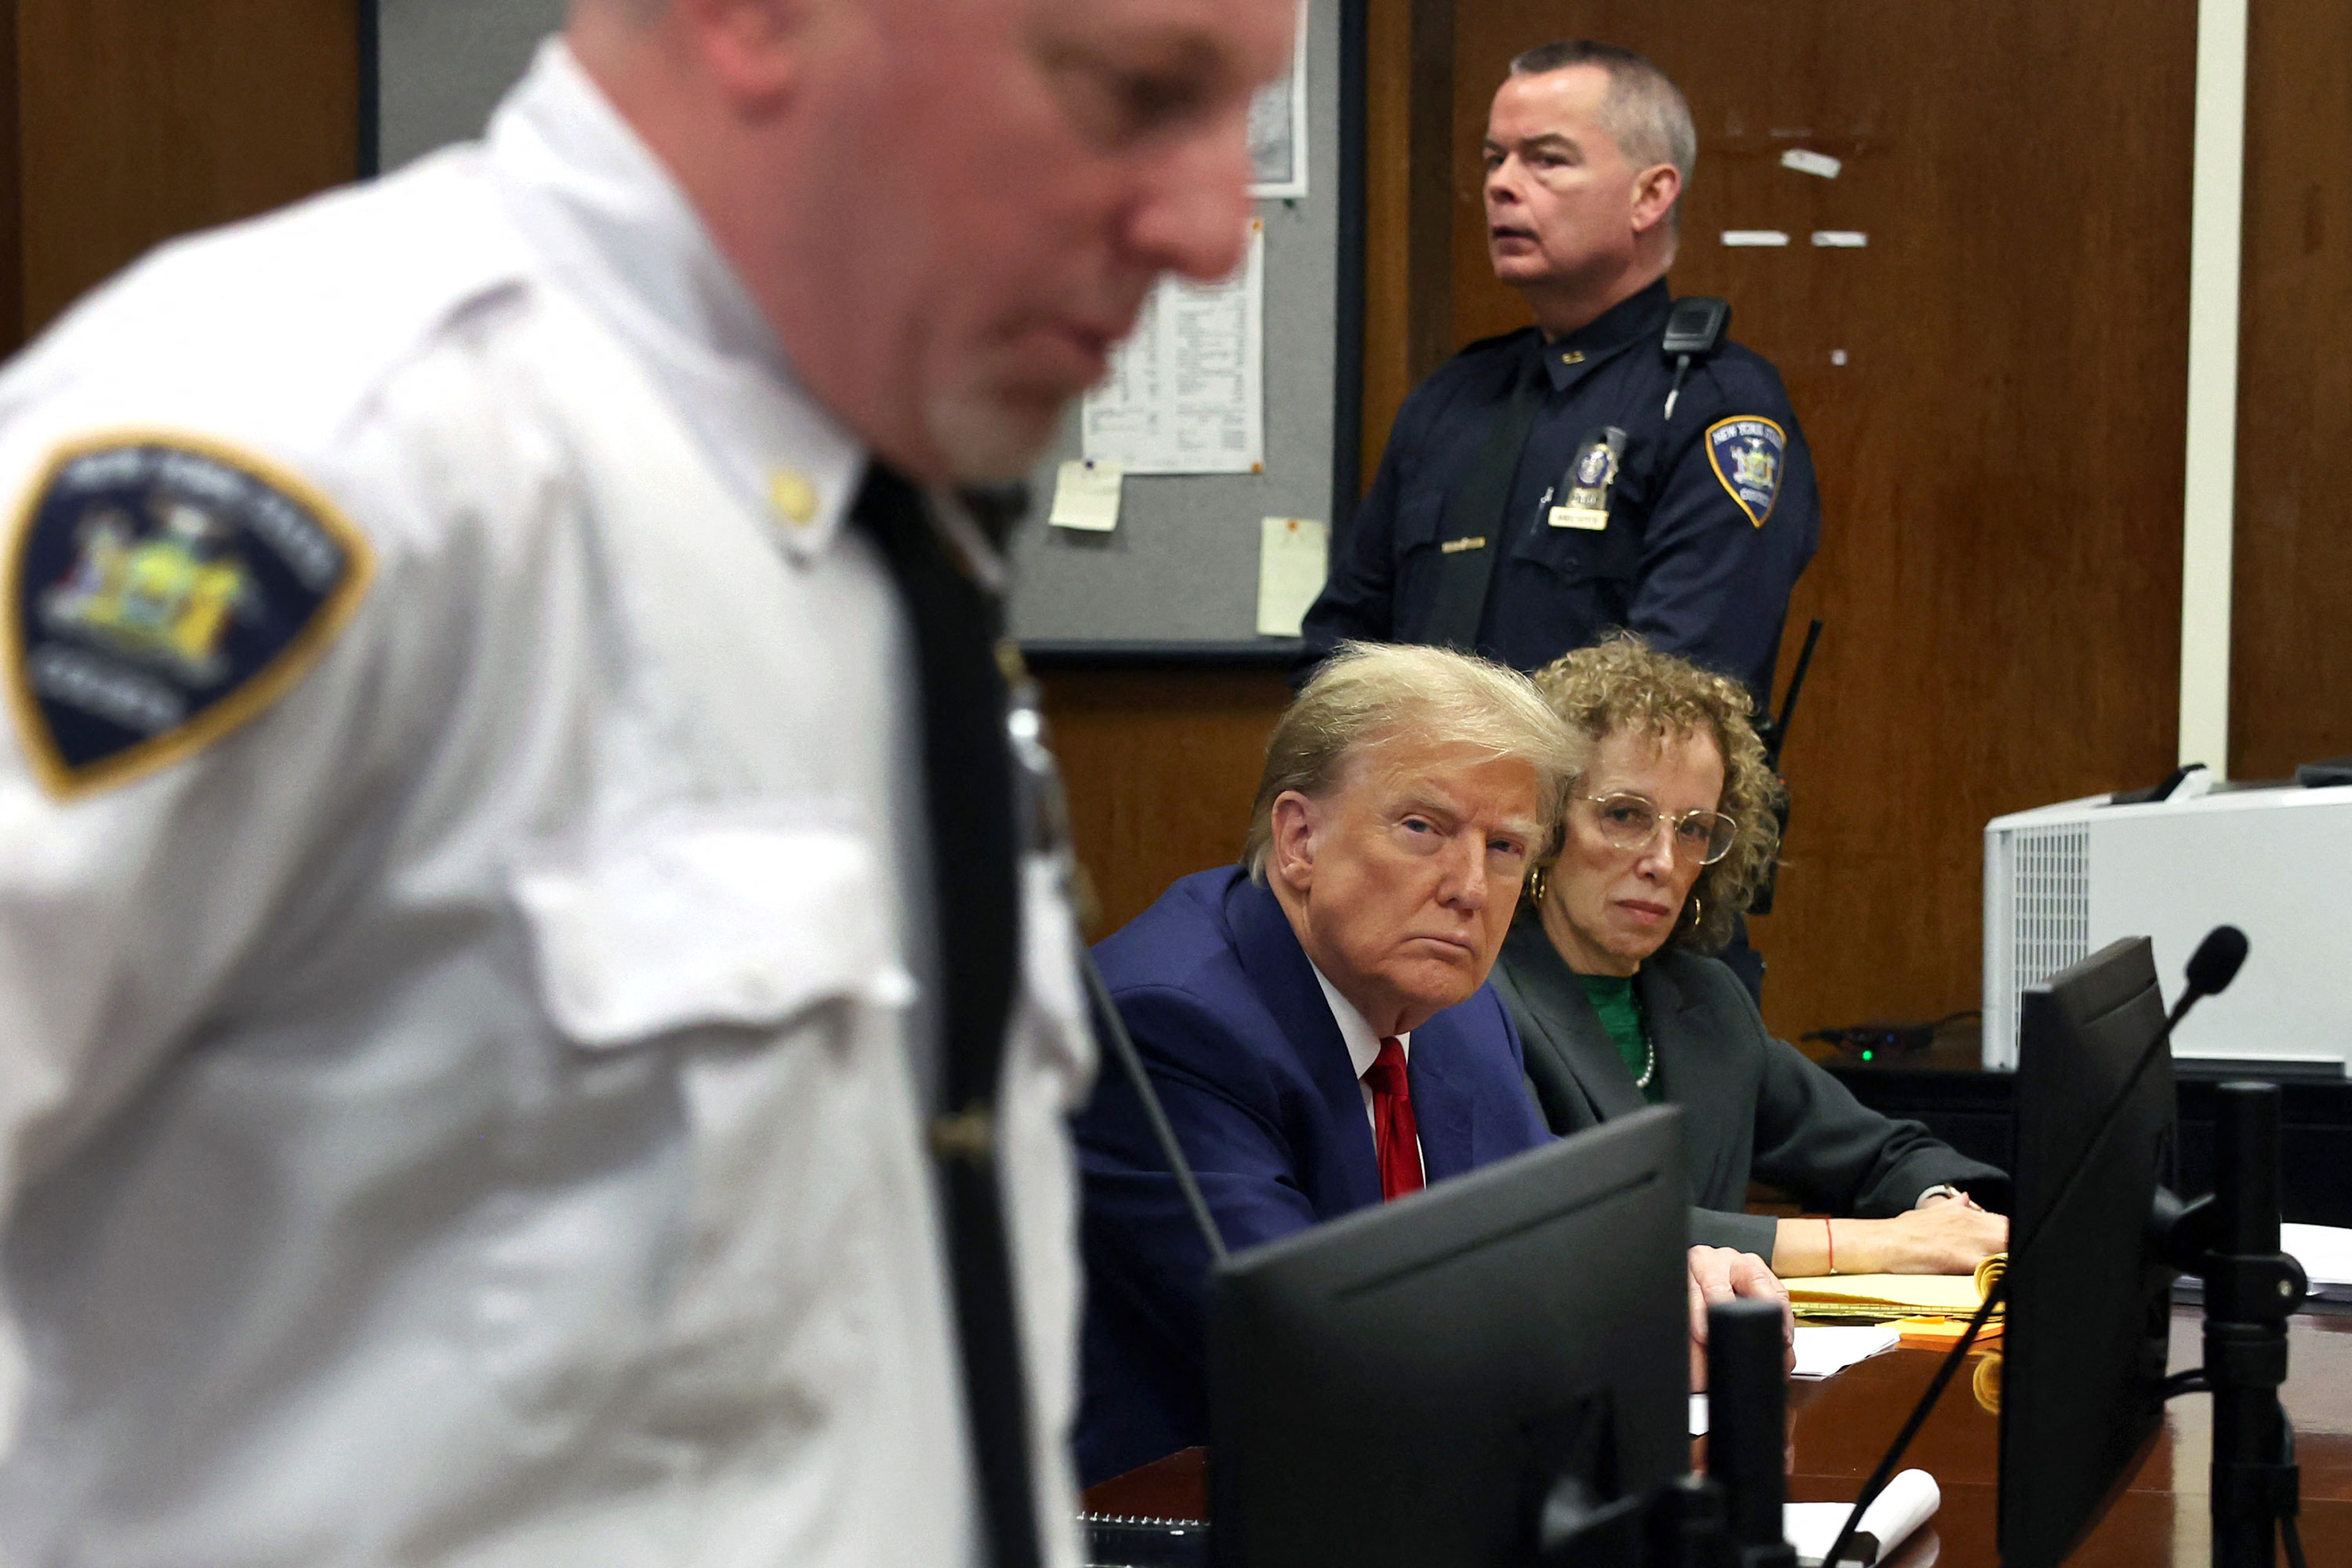 Former President Donald Trump and attorney Susan Necheles sit in court before the hearing begins on Monday.